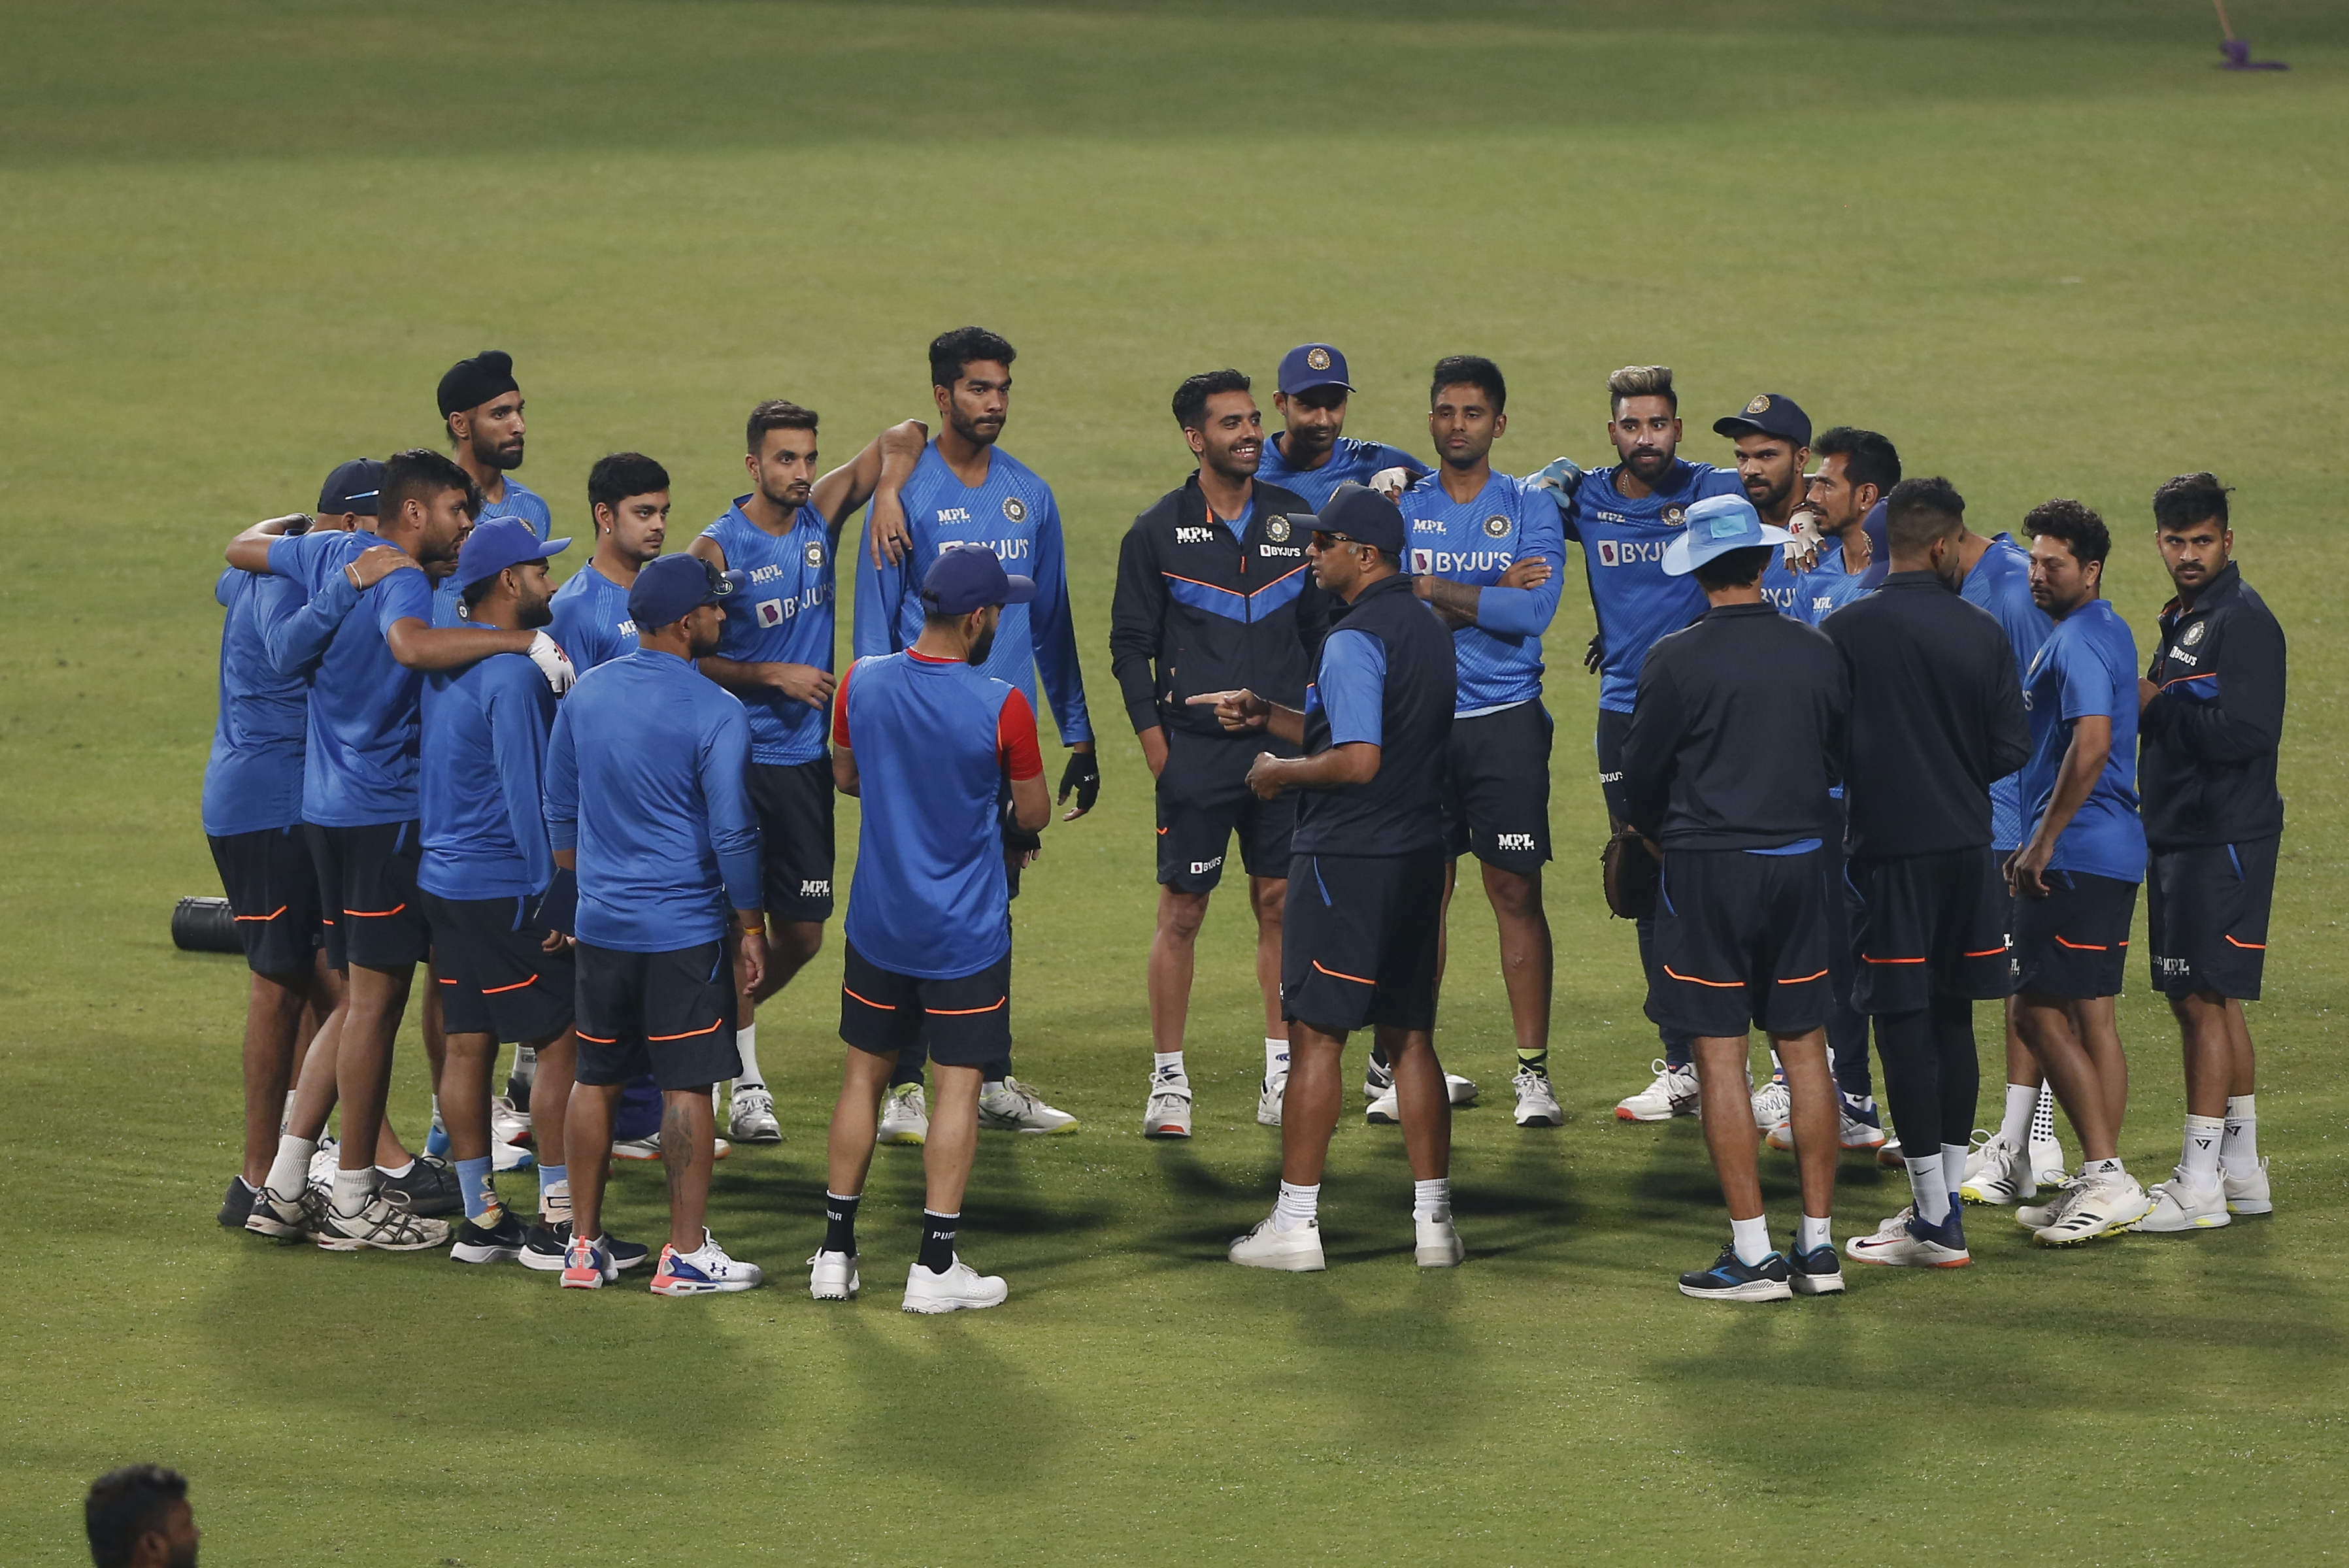 Rahul Dravid talks to Indian team as they prepare for T20I series against West Indies | BCCI